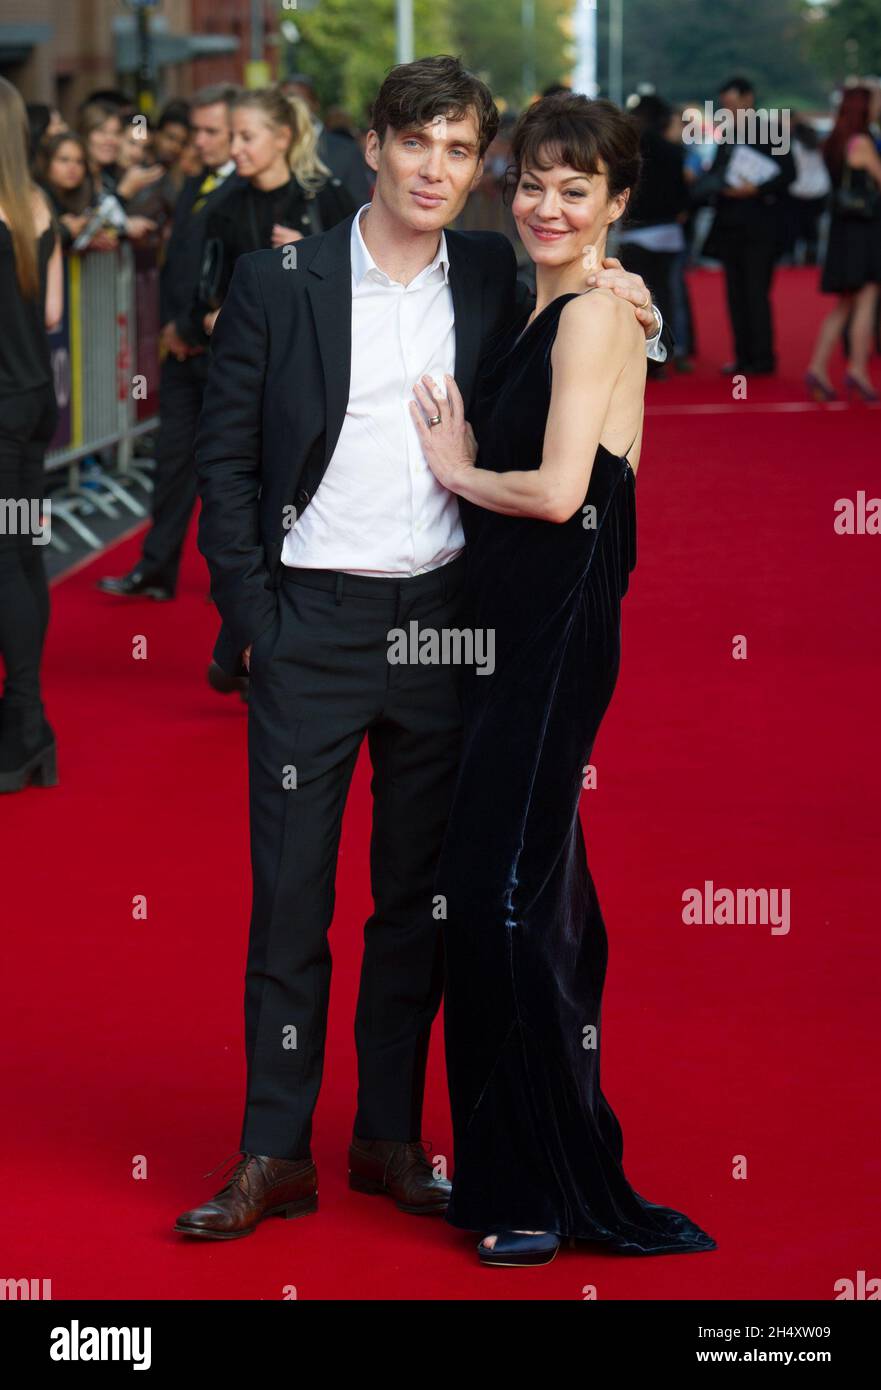 Cillian Murphy and Helen McCrory attending the world premiere screening of the first episode of the new series Peaky Blinders at Cineworld Broad Street in Birmingham on Sunday 21st September Stock Photo